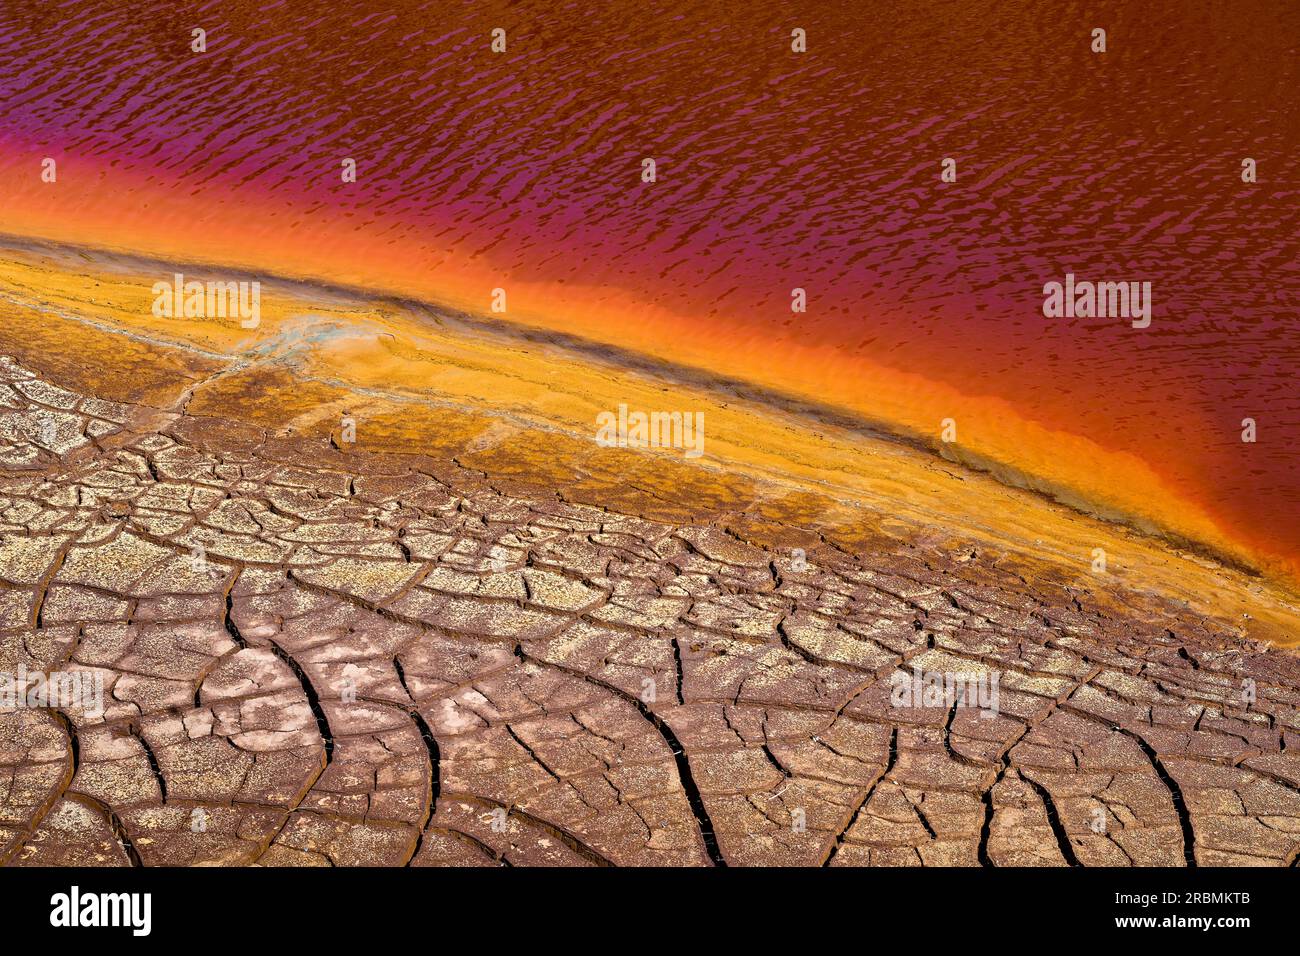 natural Textures of sulfuric deep red Water of Rio Tinto river, Province Huelva, Andalusia, Spain Stock Photo